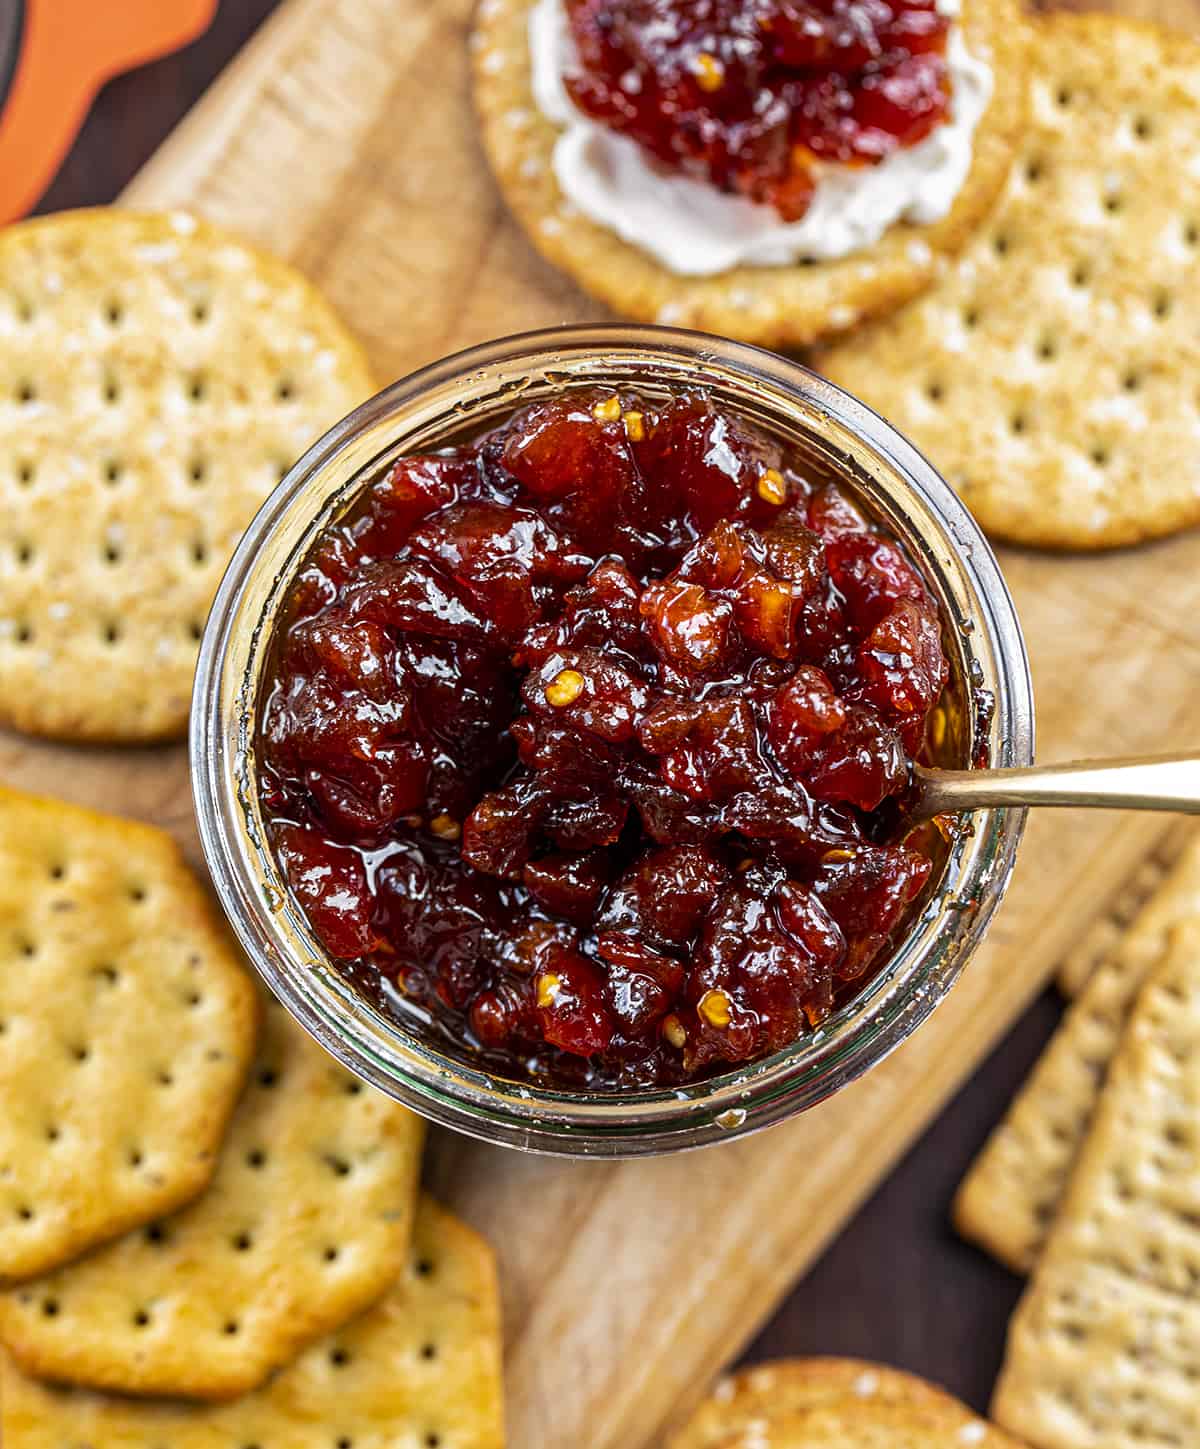 Jar of Spicy Tomato Jam with Crackers on a Cutting Board. Appetizer, Burger Topping Idea, Tomato Jam, How to Make Tomato Jam, Spicy Jam, Homemade Tomato Jam, How to Can Tomato Jam, Cracker Spreads, Super Bowl Food, Christmas Appetizers, Thanksgiving Appetizers, i am homesteader, iamhomesteader